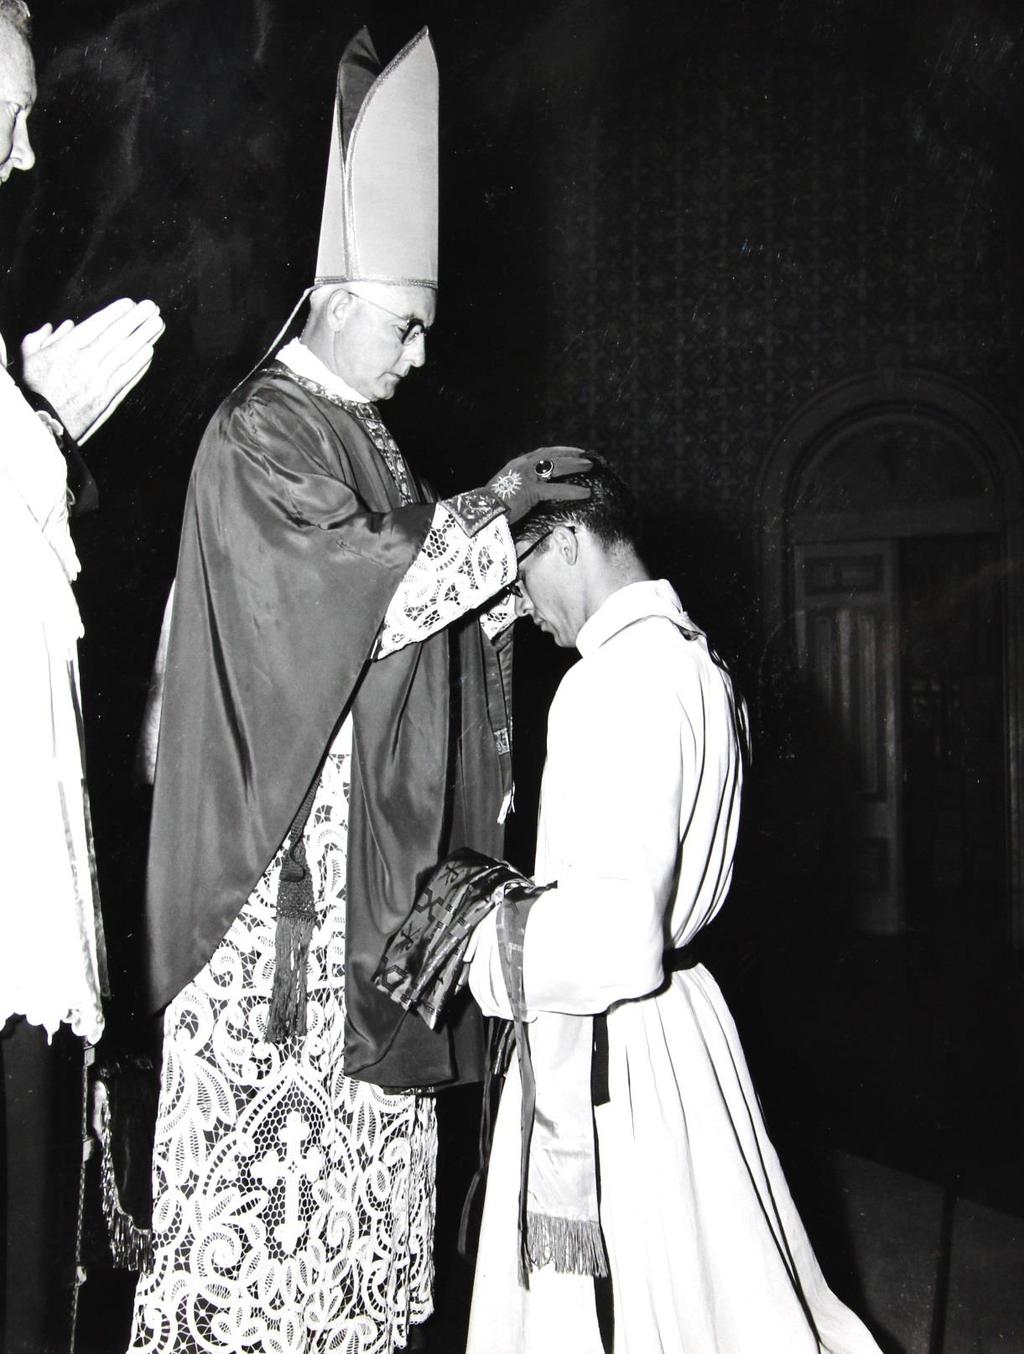 Ordination to the Priesthood Russ made it through his theology classes and was ordained a subdeacon by Bishop McGucken in 1961 in the Menlo Park seminary chapel.